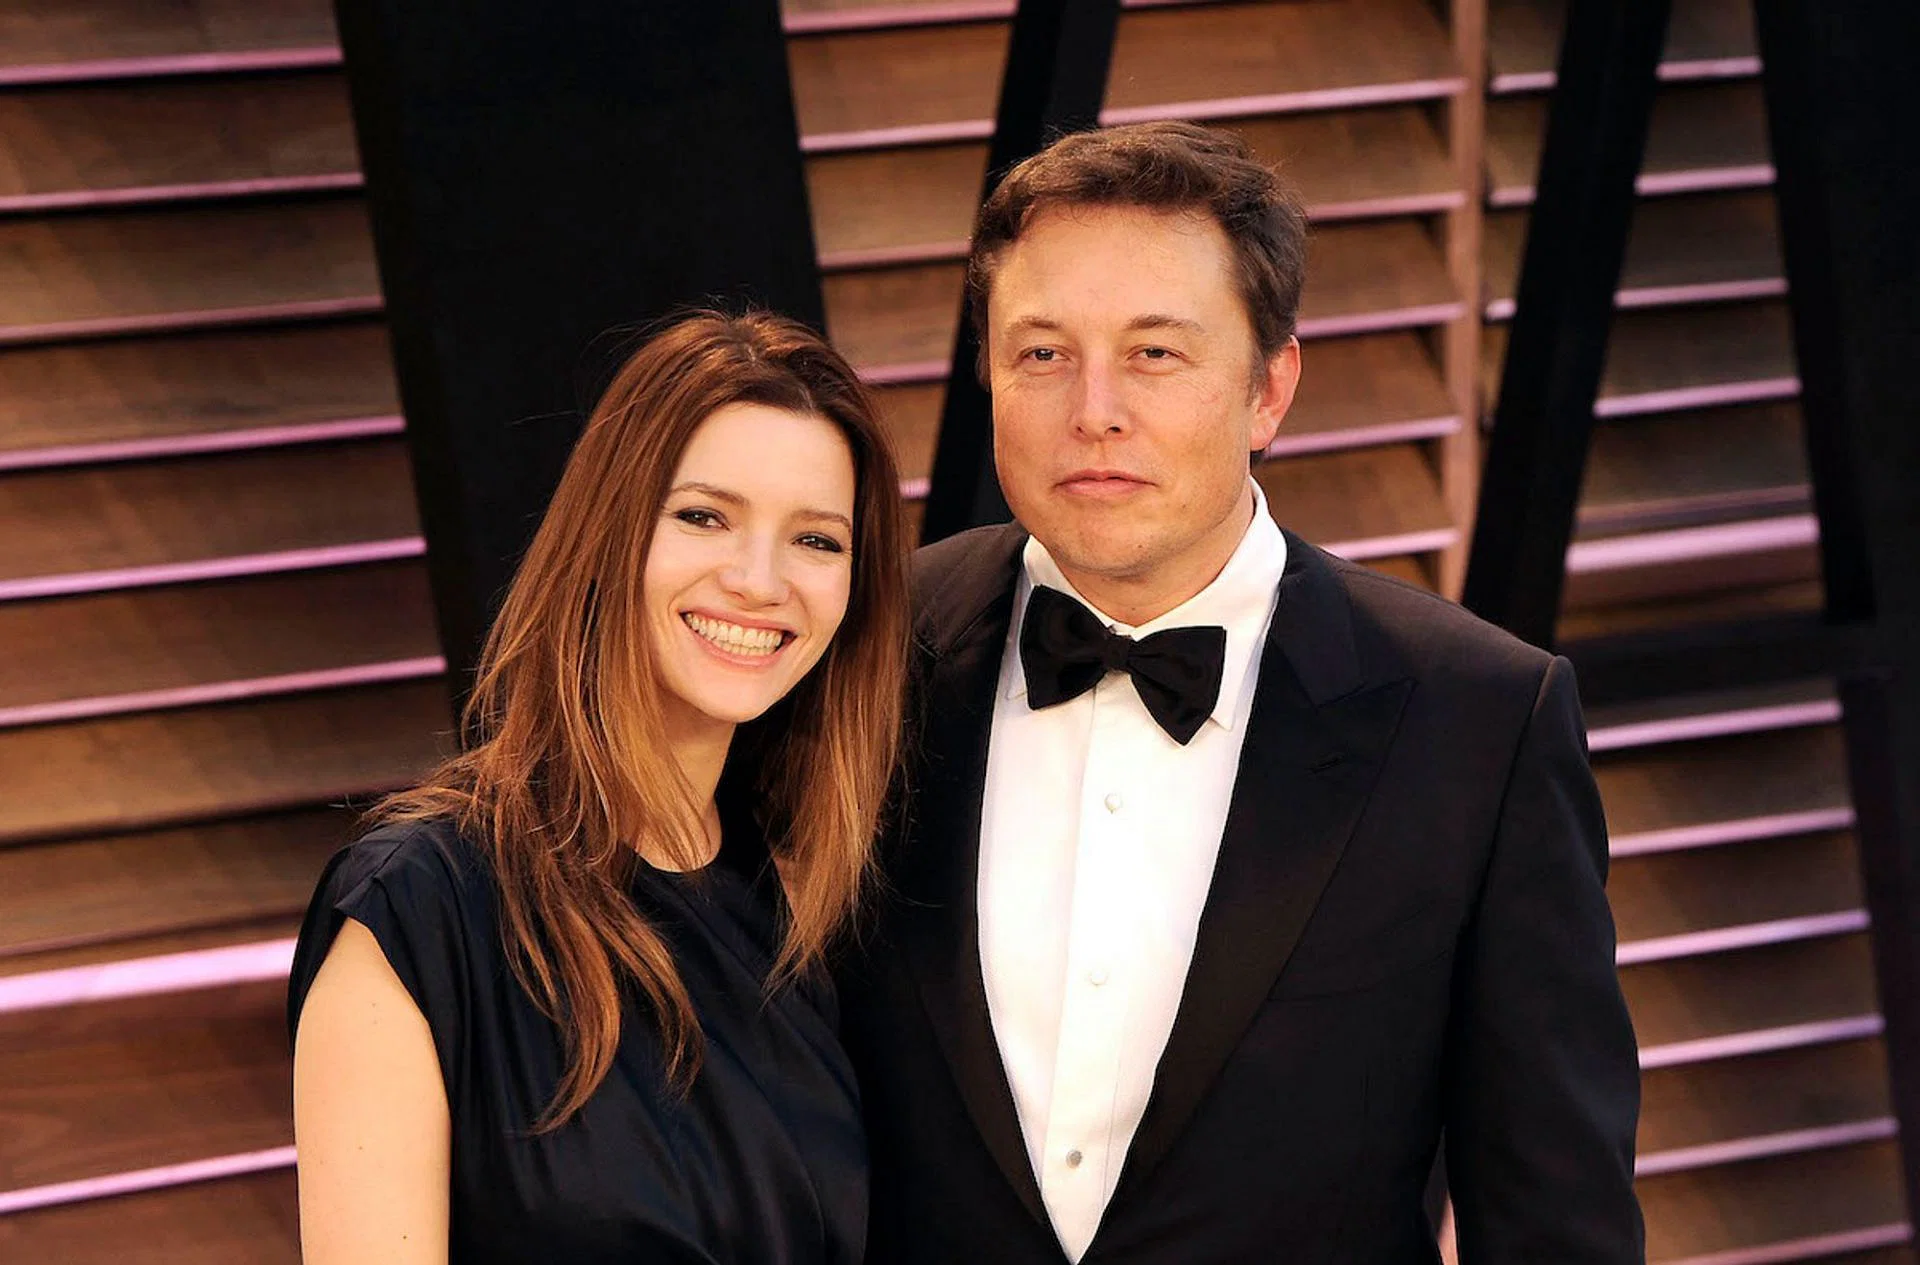 Elon Musk opened up about his relationship with his daughter Vivian